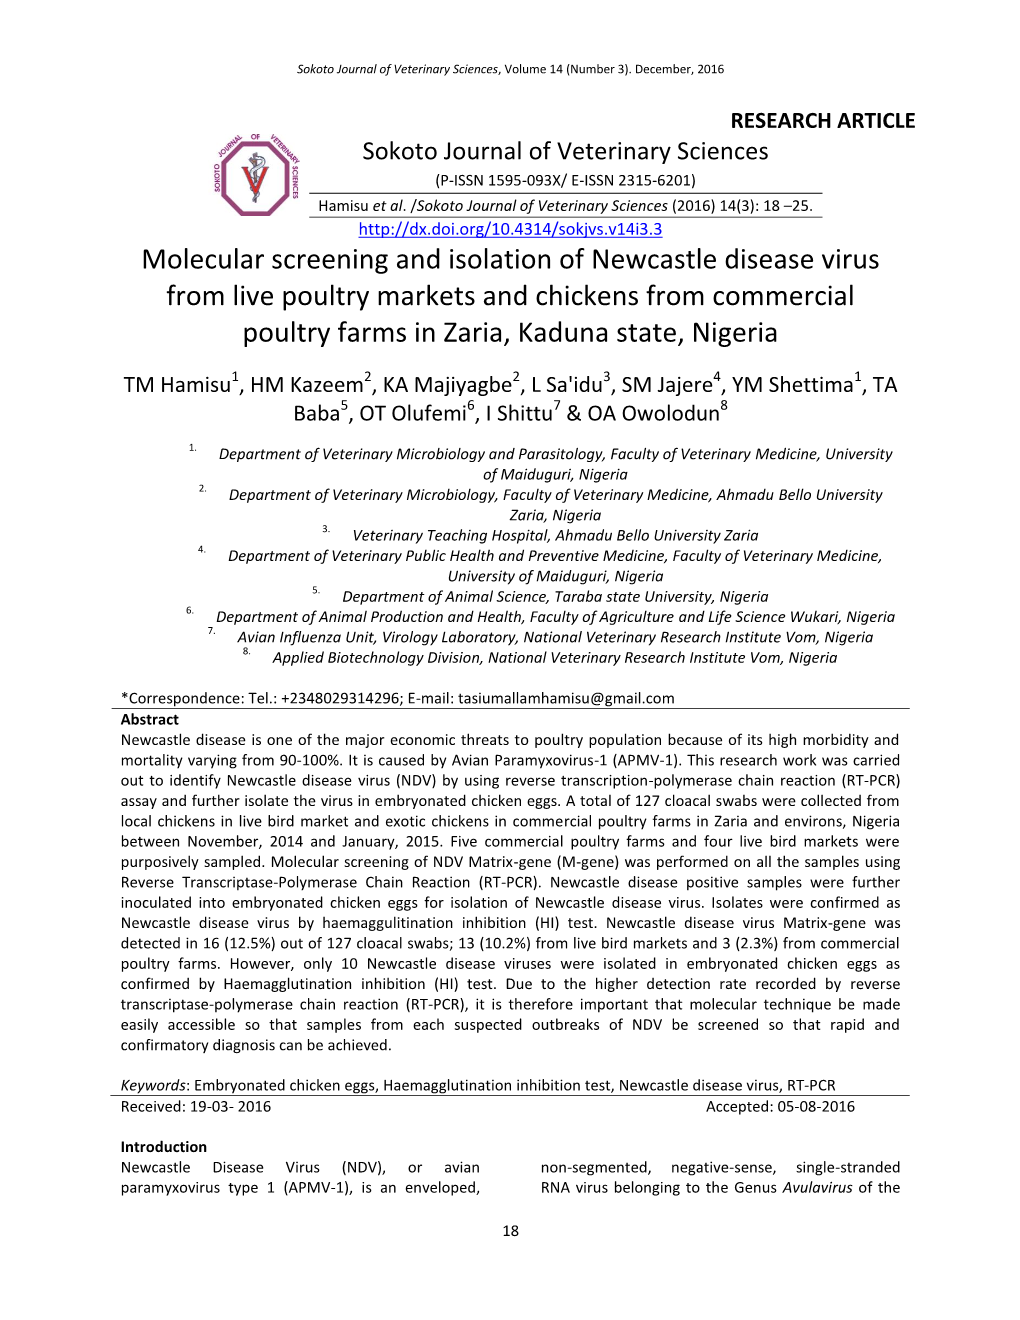 Molecular Screening and Isolation of Newcastle Disease Virus from Live Poultry Markets and Chickens from Commercial Poultry Farms in Zaria, Kaduna State, Nigeria